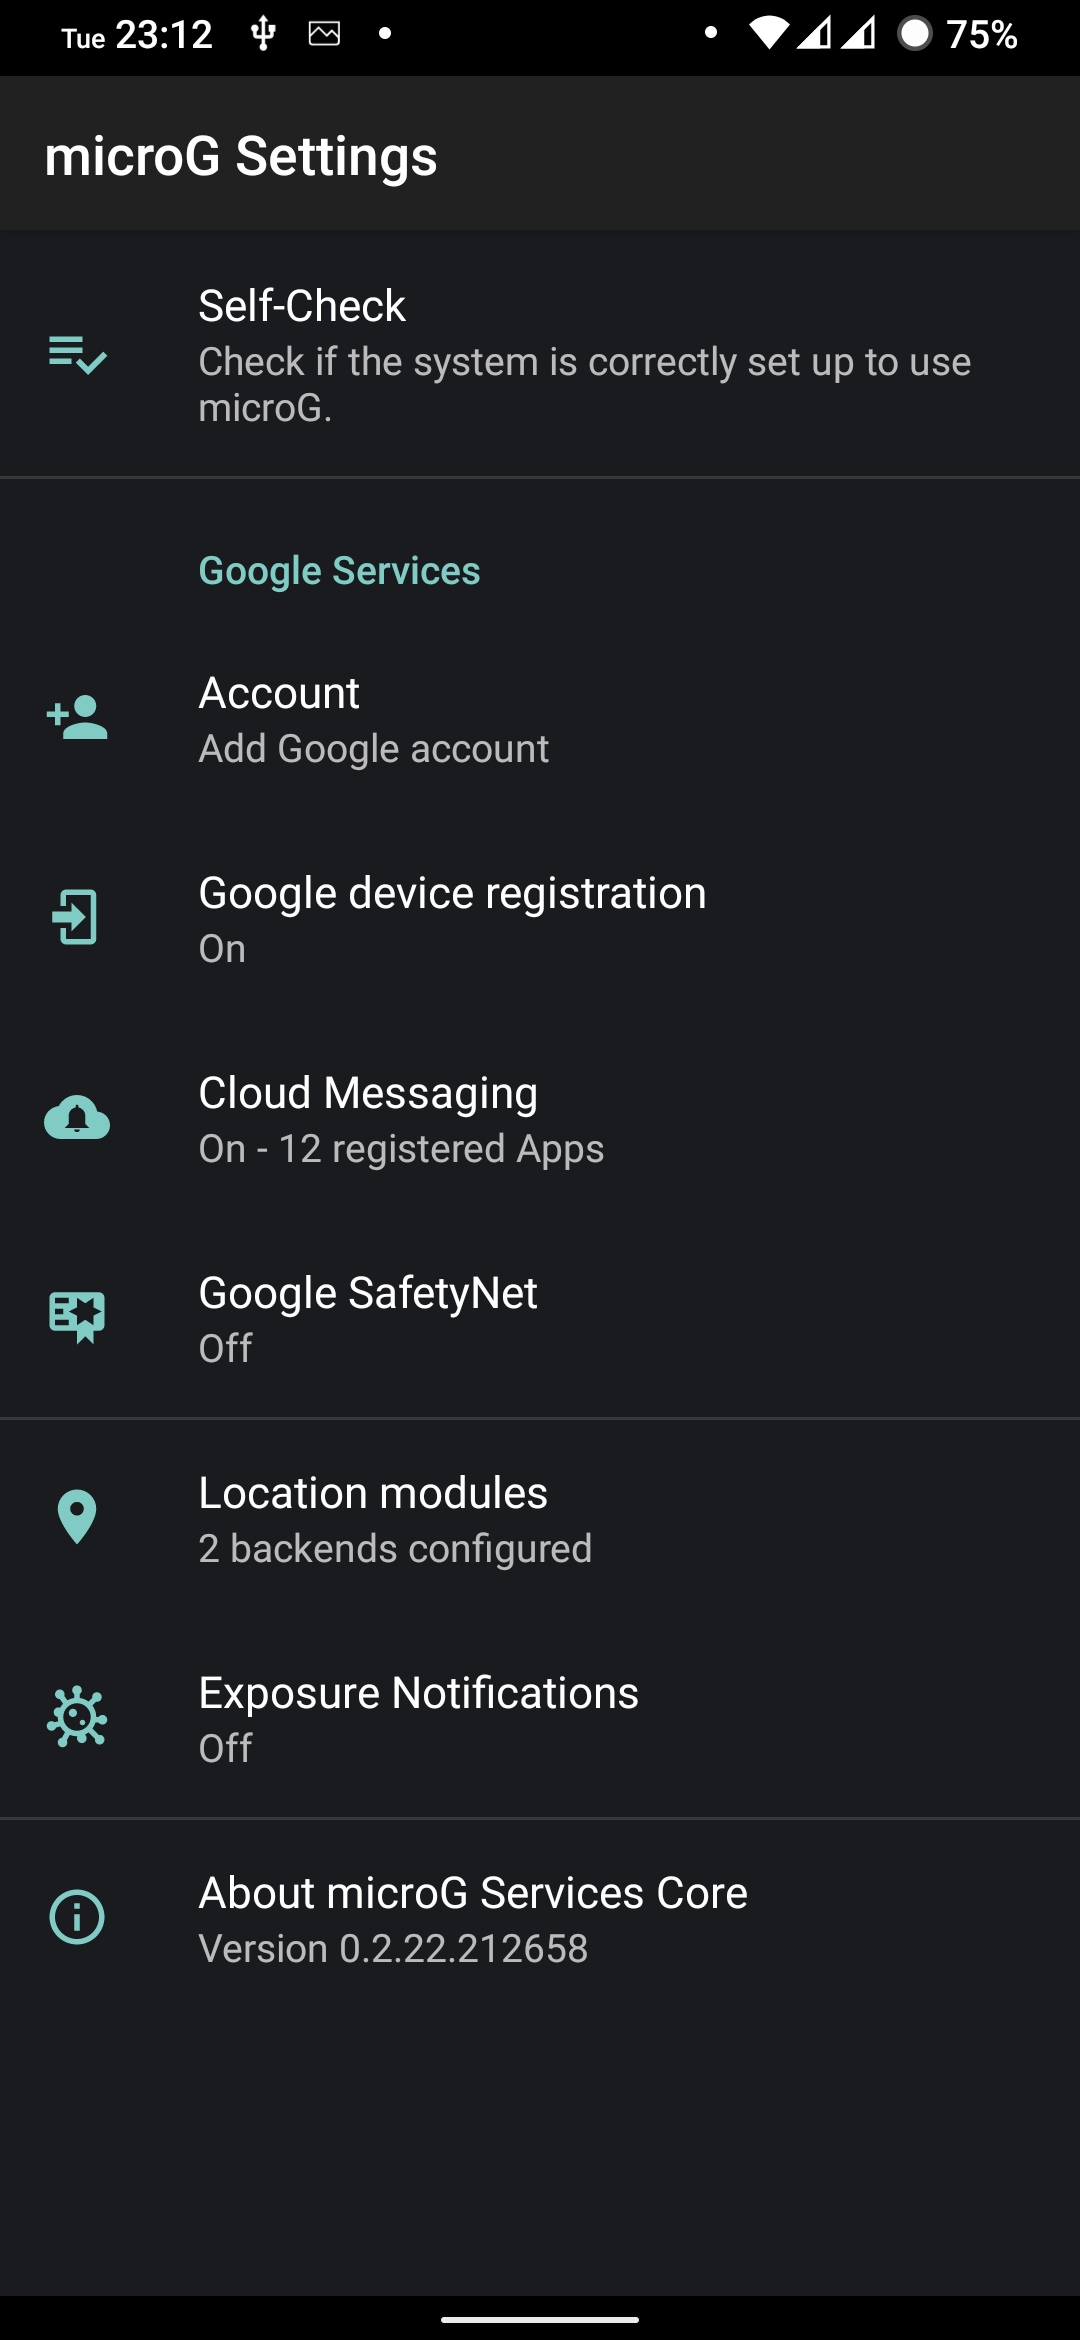 crdroid-android-rom-xiaomi-redmi-9-microg-settings